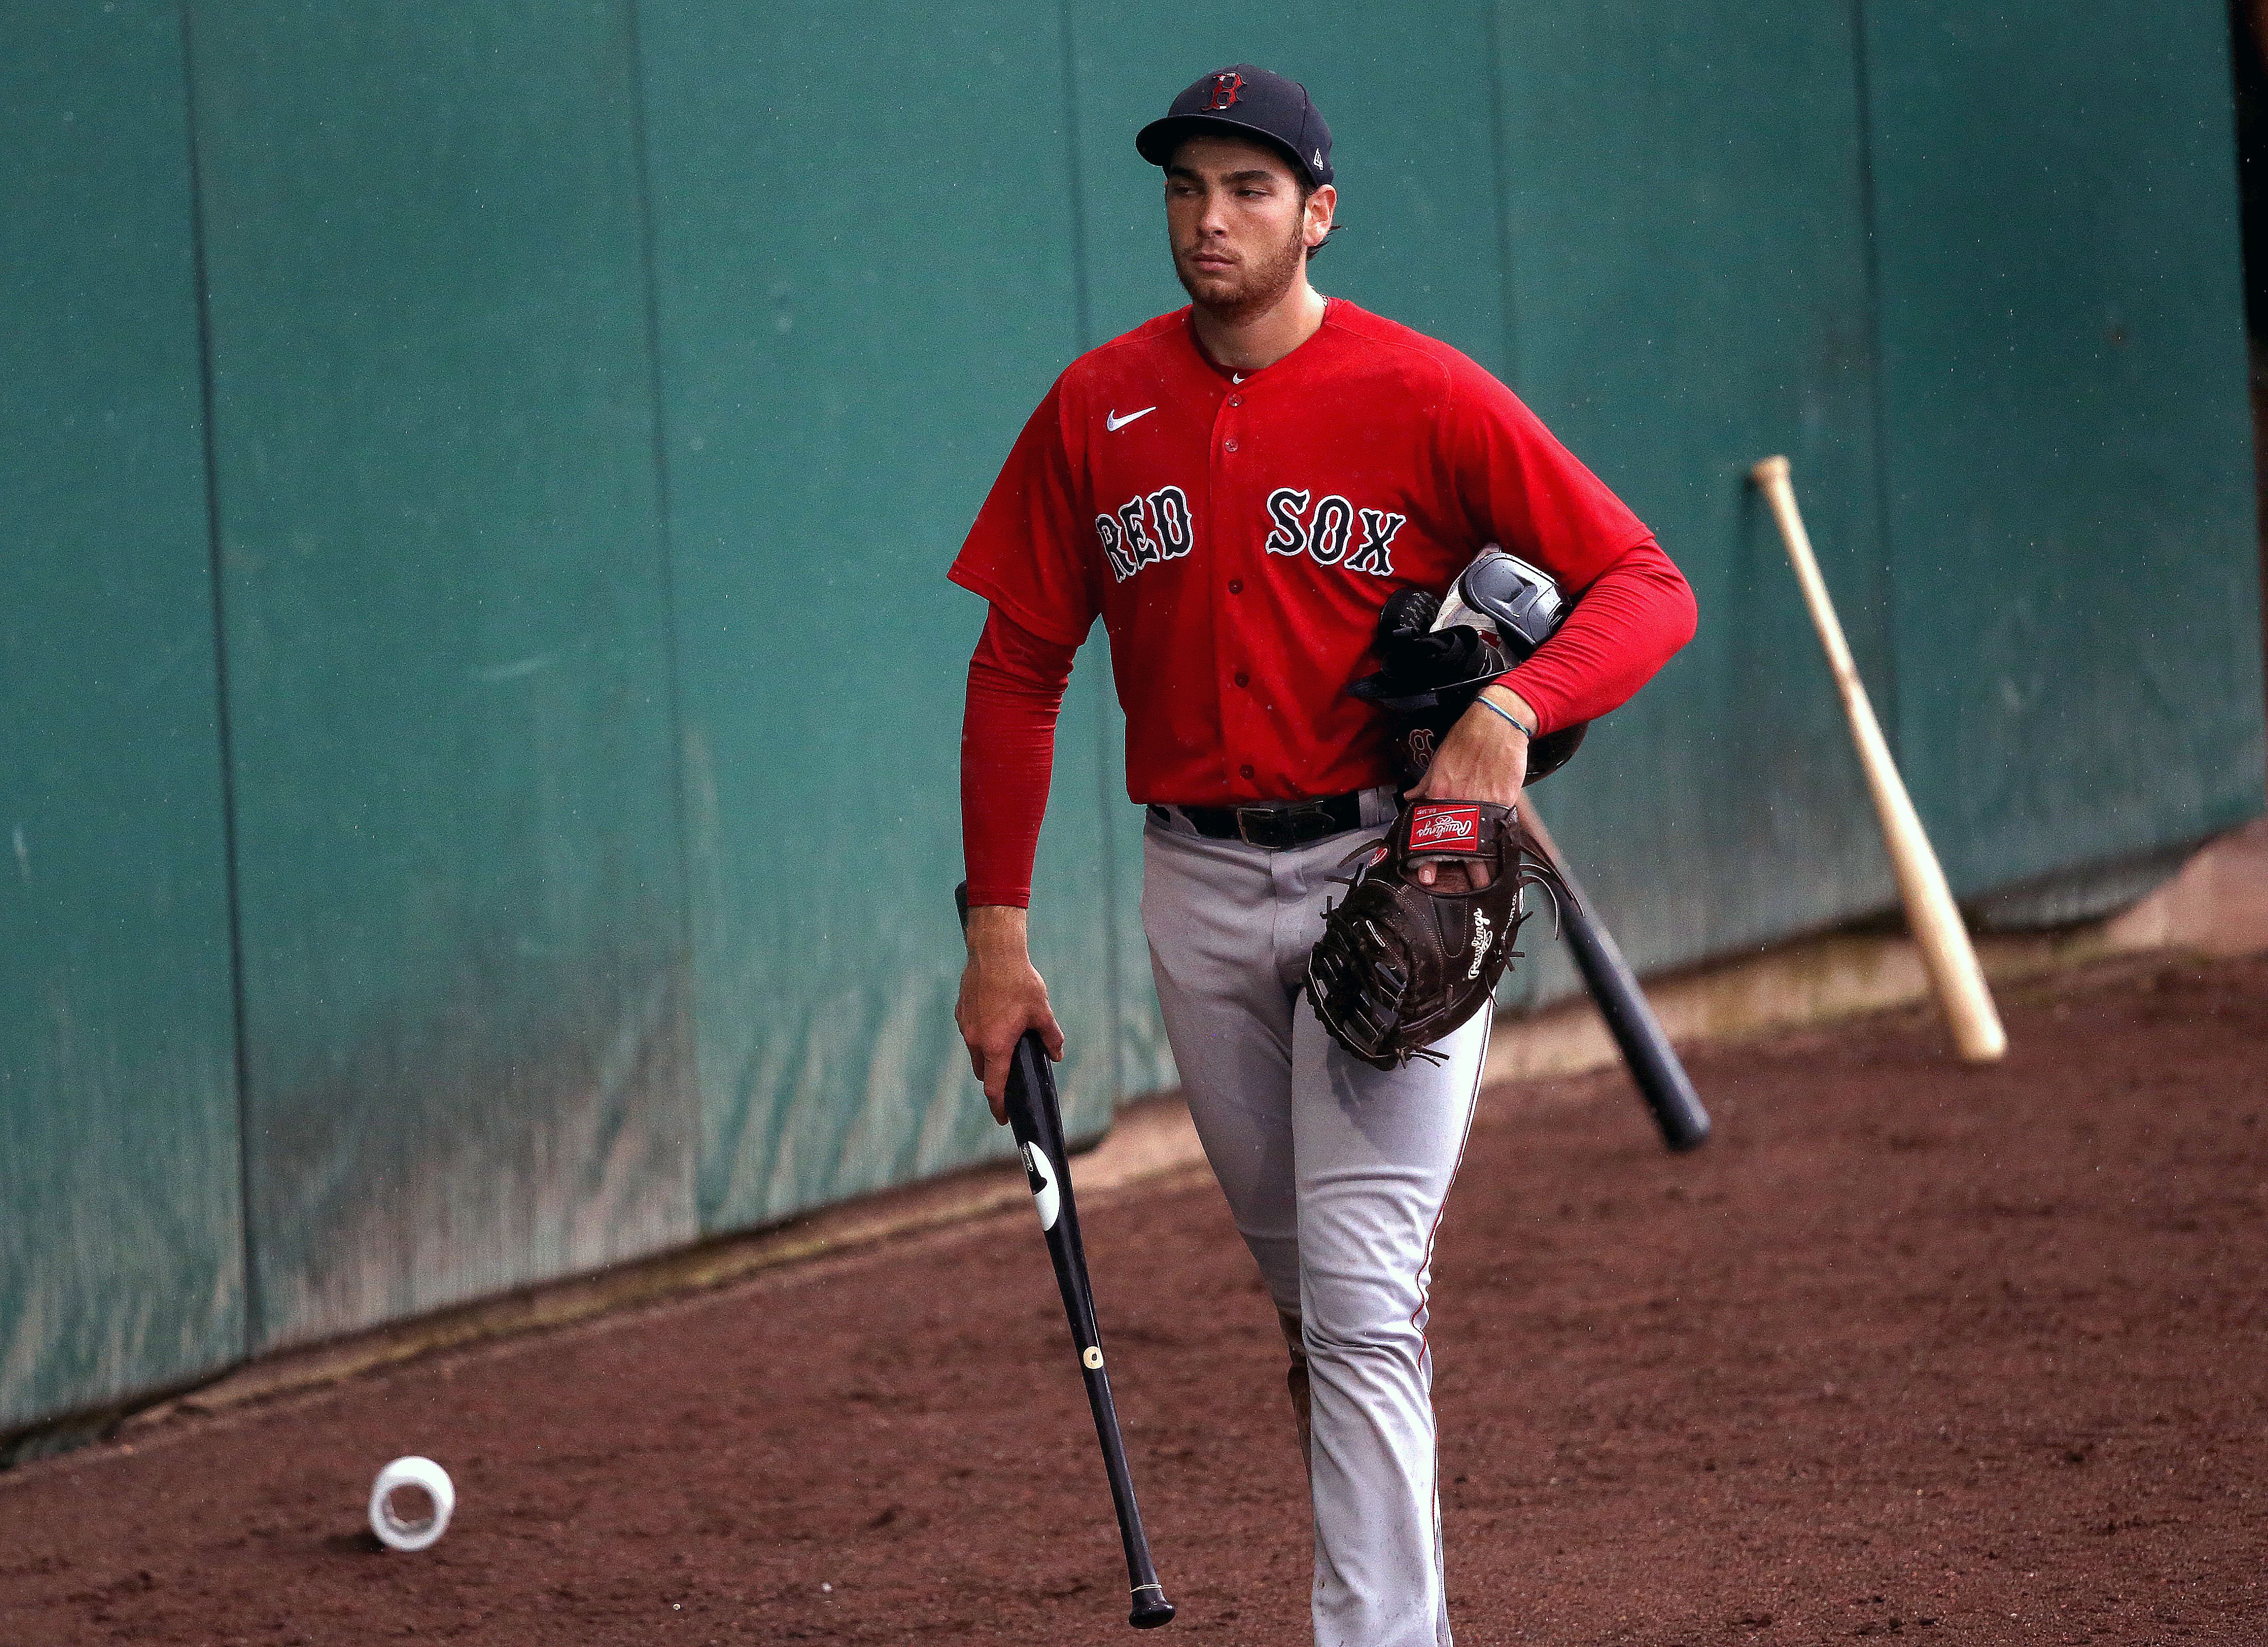 Jonathan Lucroy trending up in Red Sox camp thanks to Jason